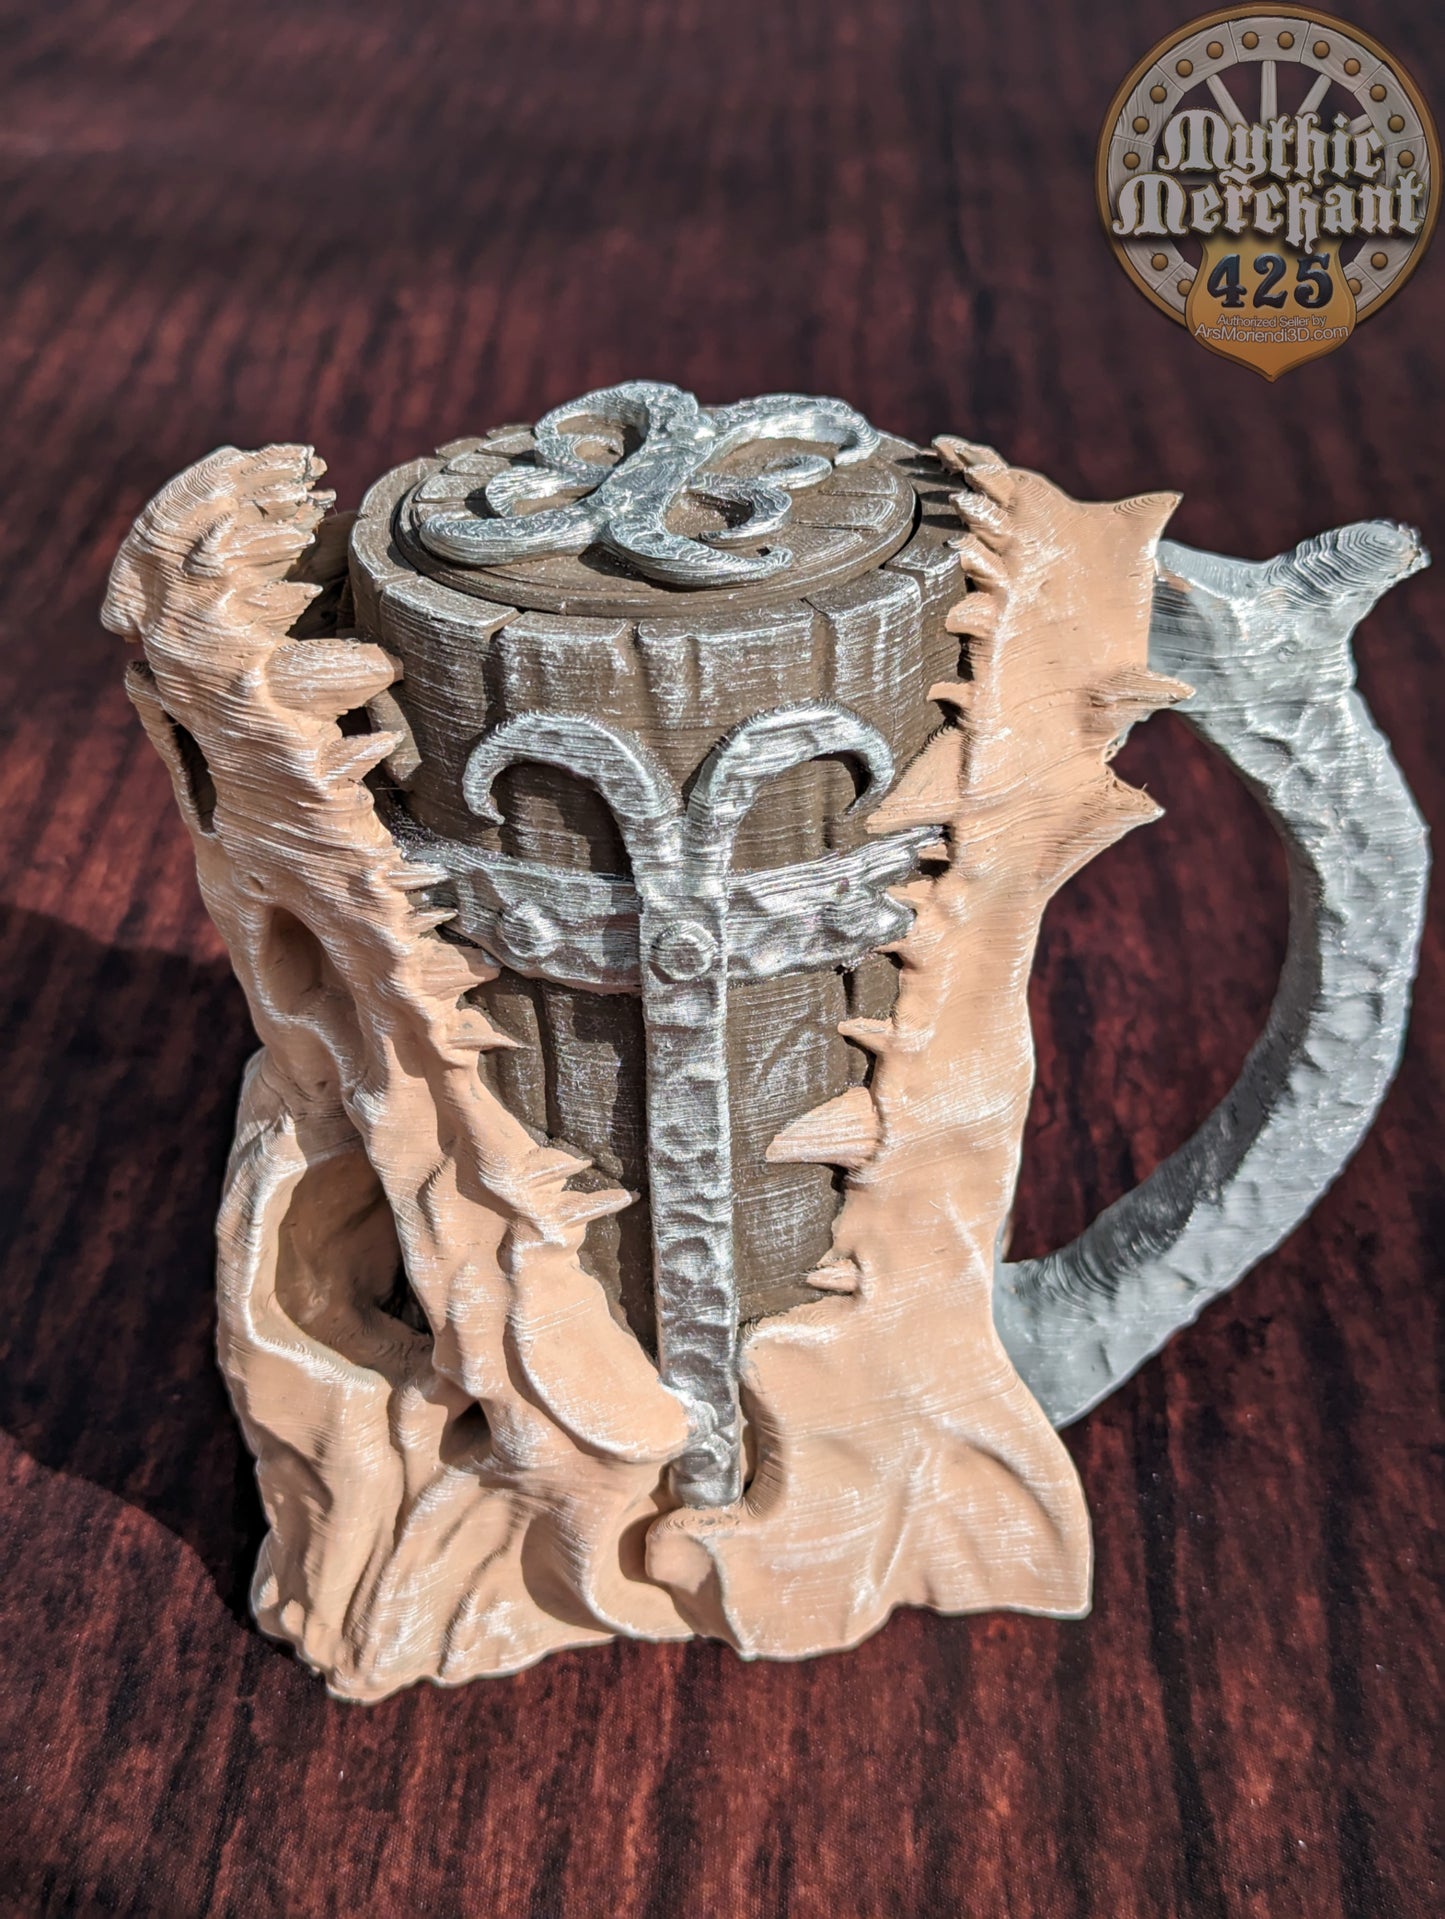 Dragon Skull 3D Printed Mythic Mug Stein | Tabletop RPG Gaming Cosplay - Dungeons and Dragon DnD D&D Wargaming | Drink Koozie